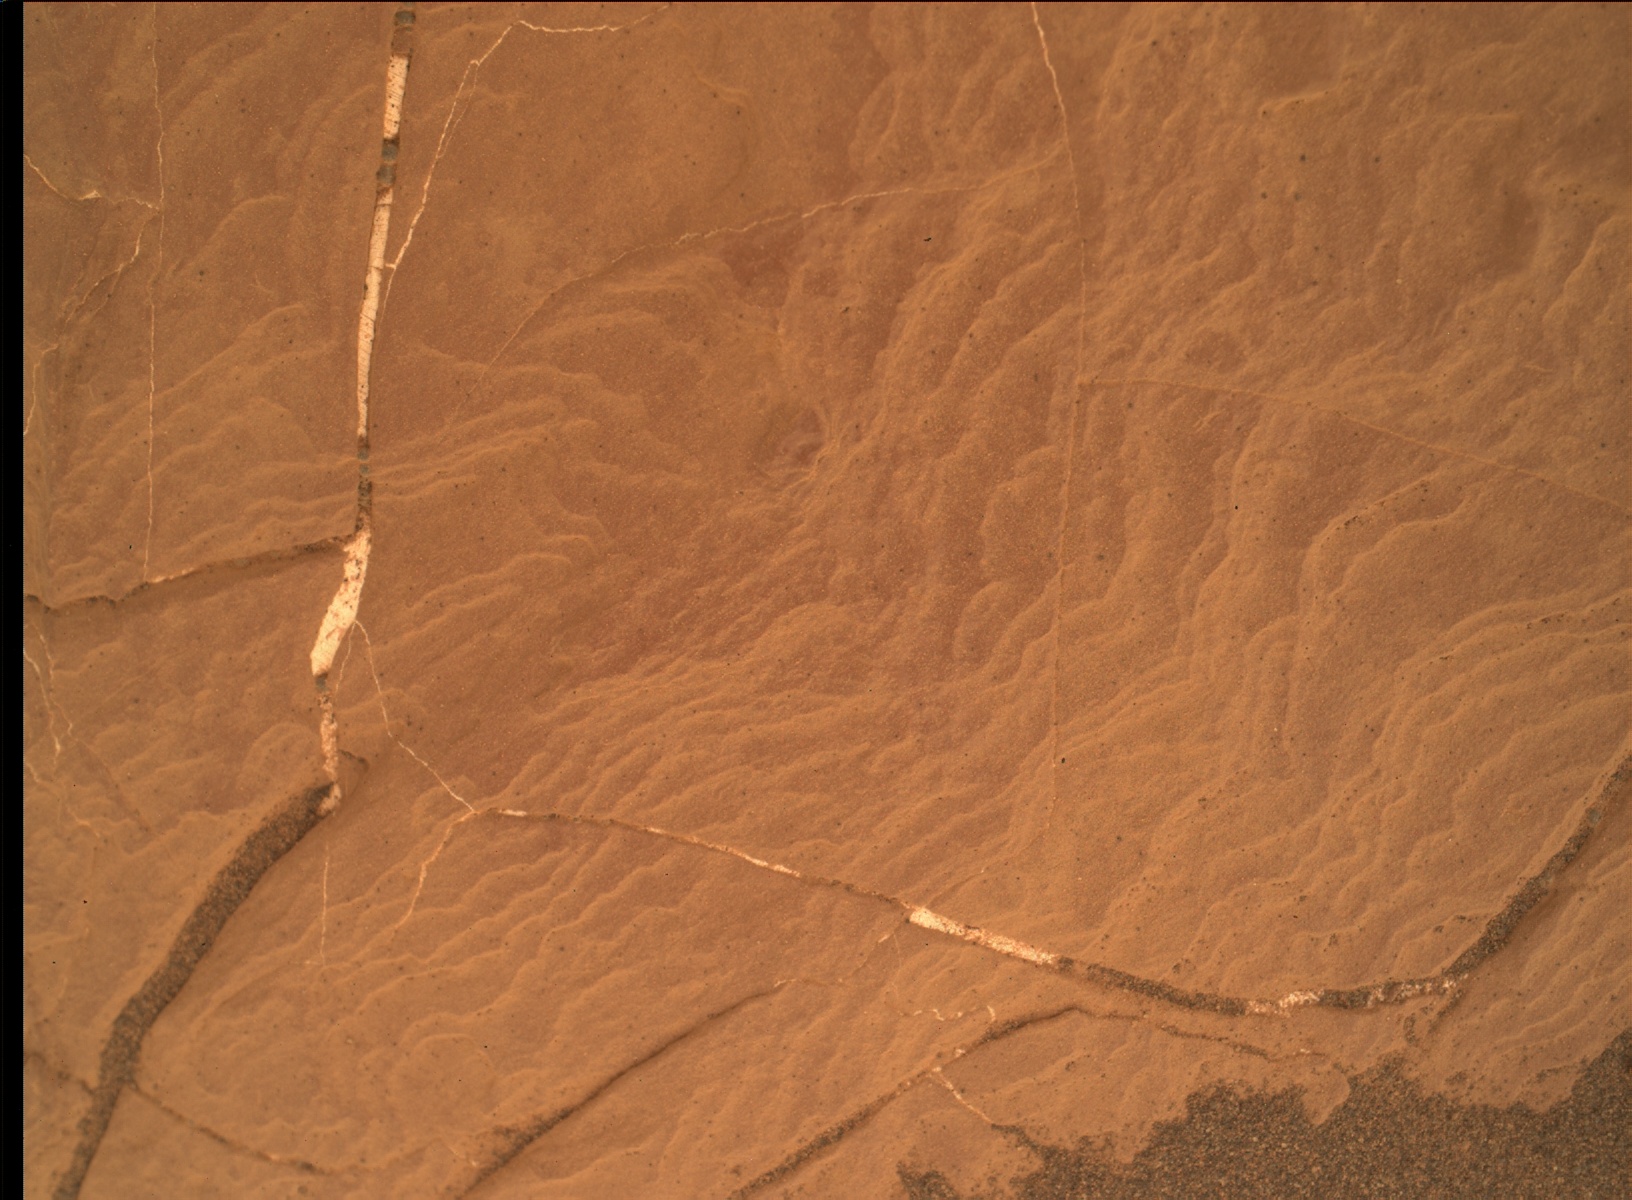 Nasa's Mars rover Curiosity acquired this image using its Mars Hand Lens Imager (MAHLI) on Sol 2119